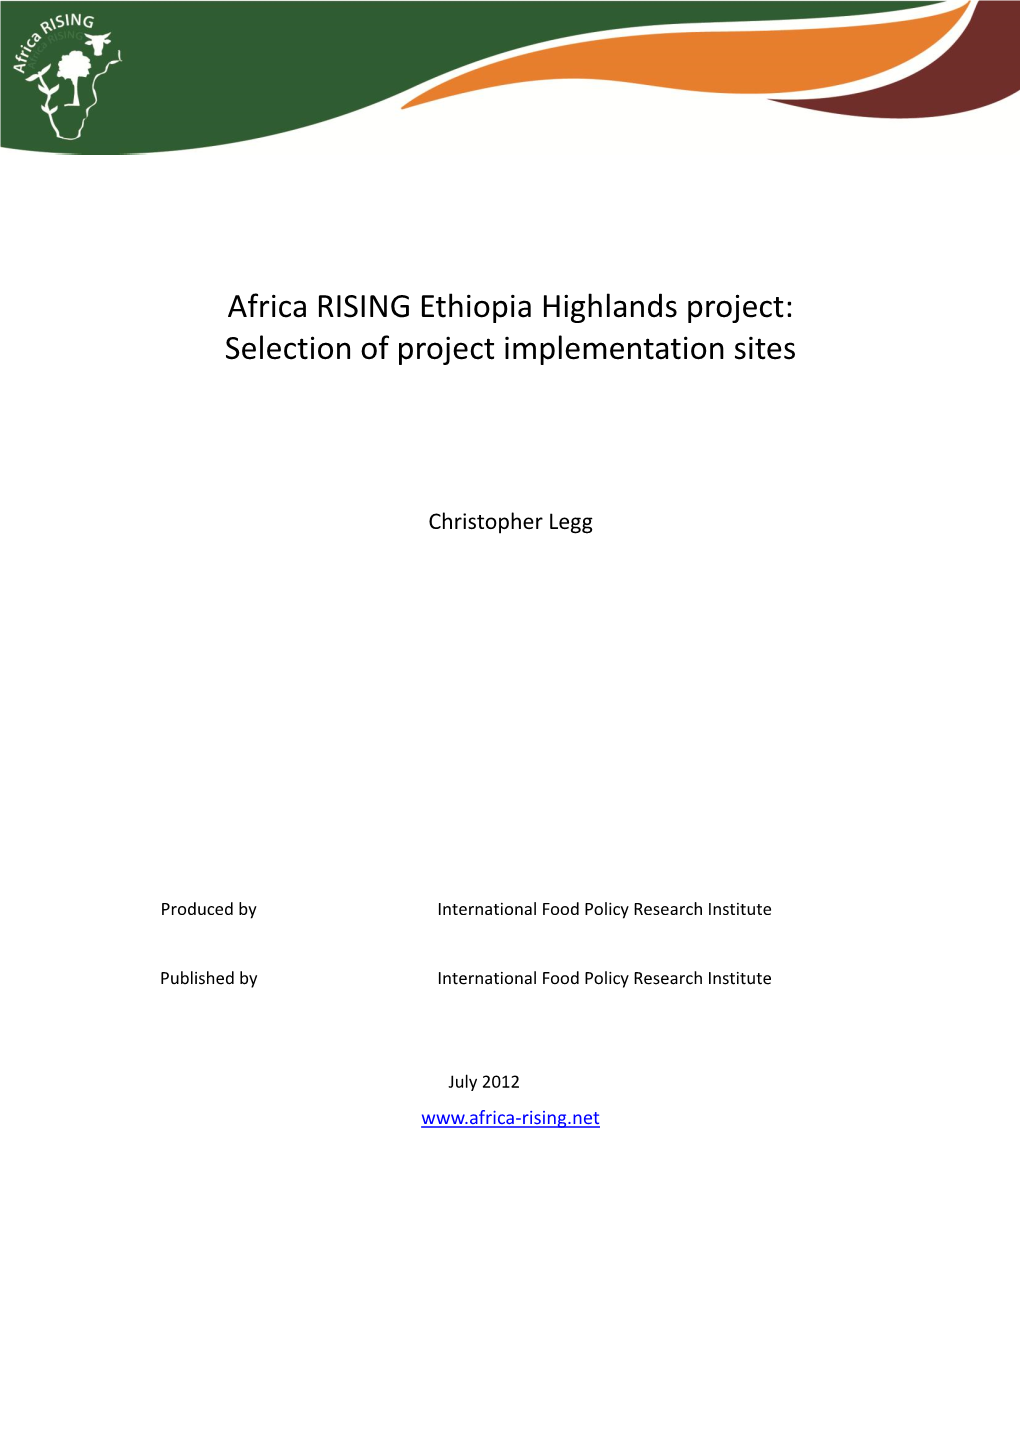 Africa RISING Ethiopia Highlands Project: Selection of Project Implementation Sites